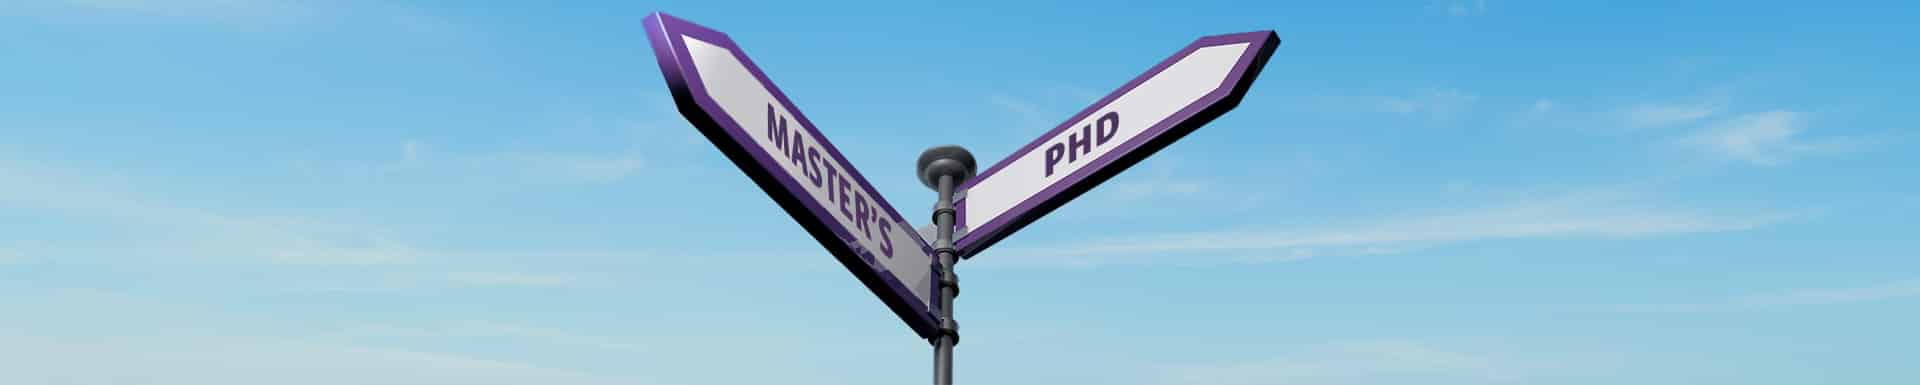 Master's vs PhD — These are the Main Differences - University of ...